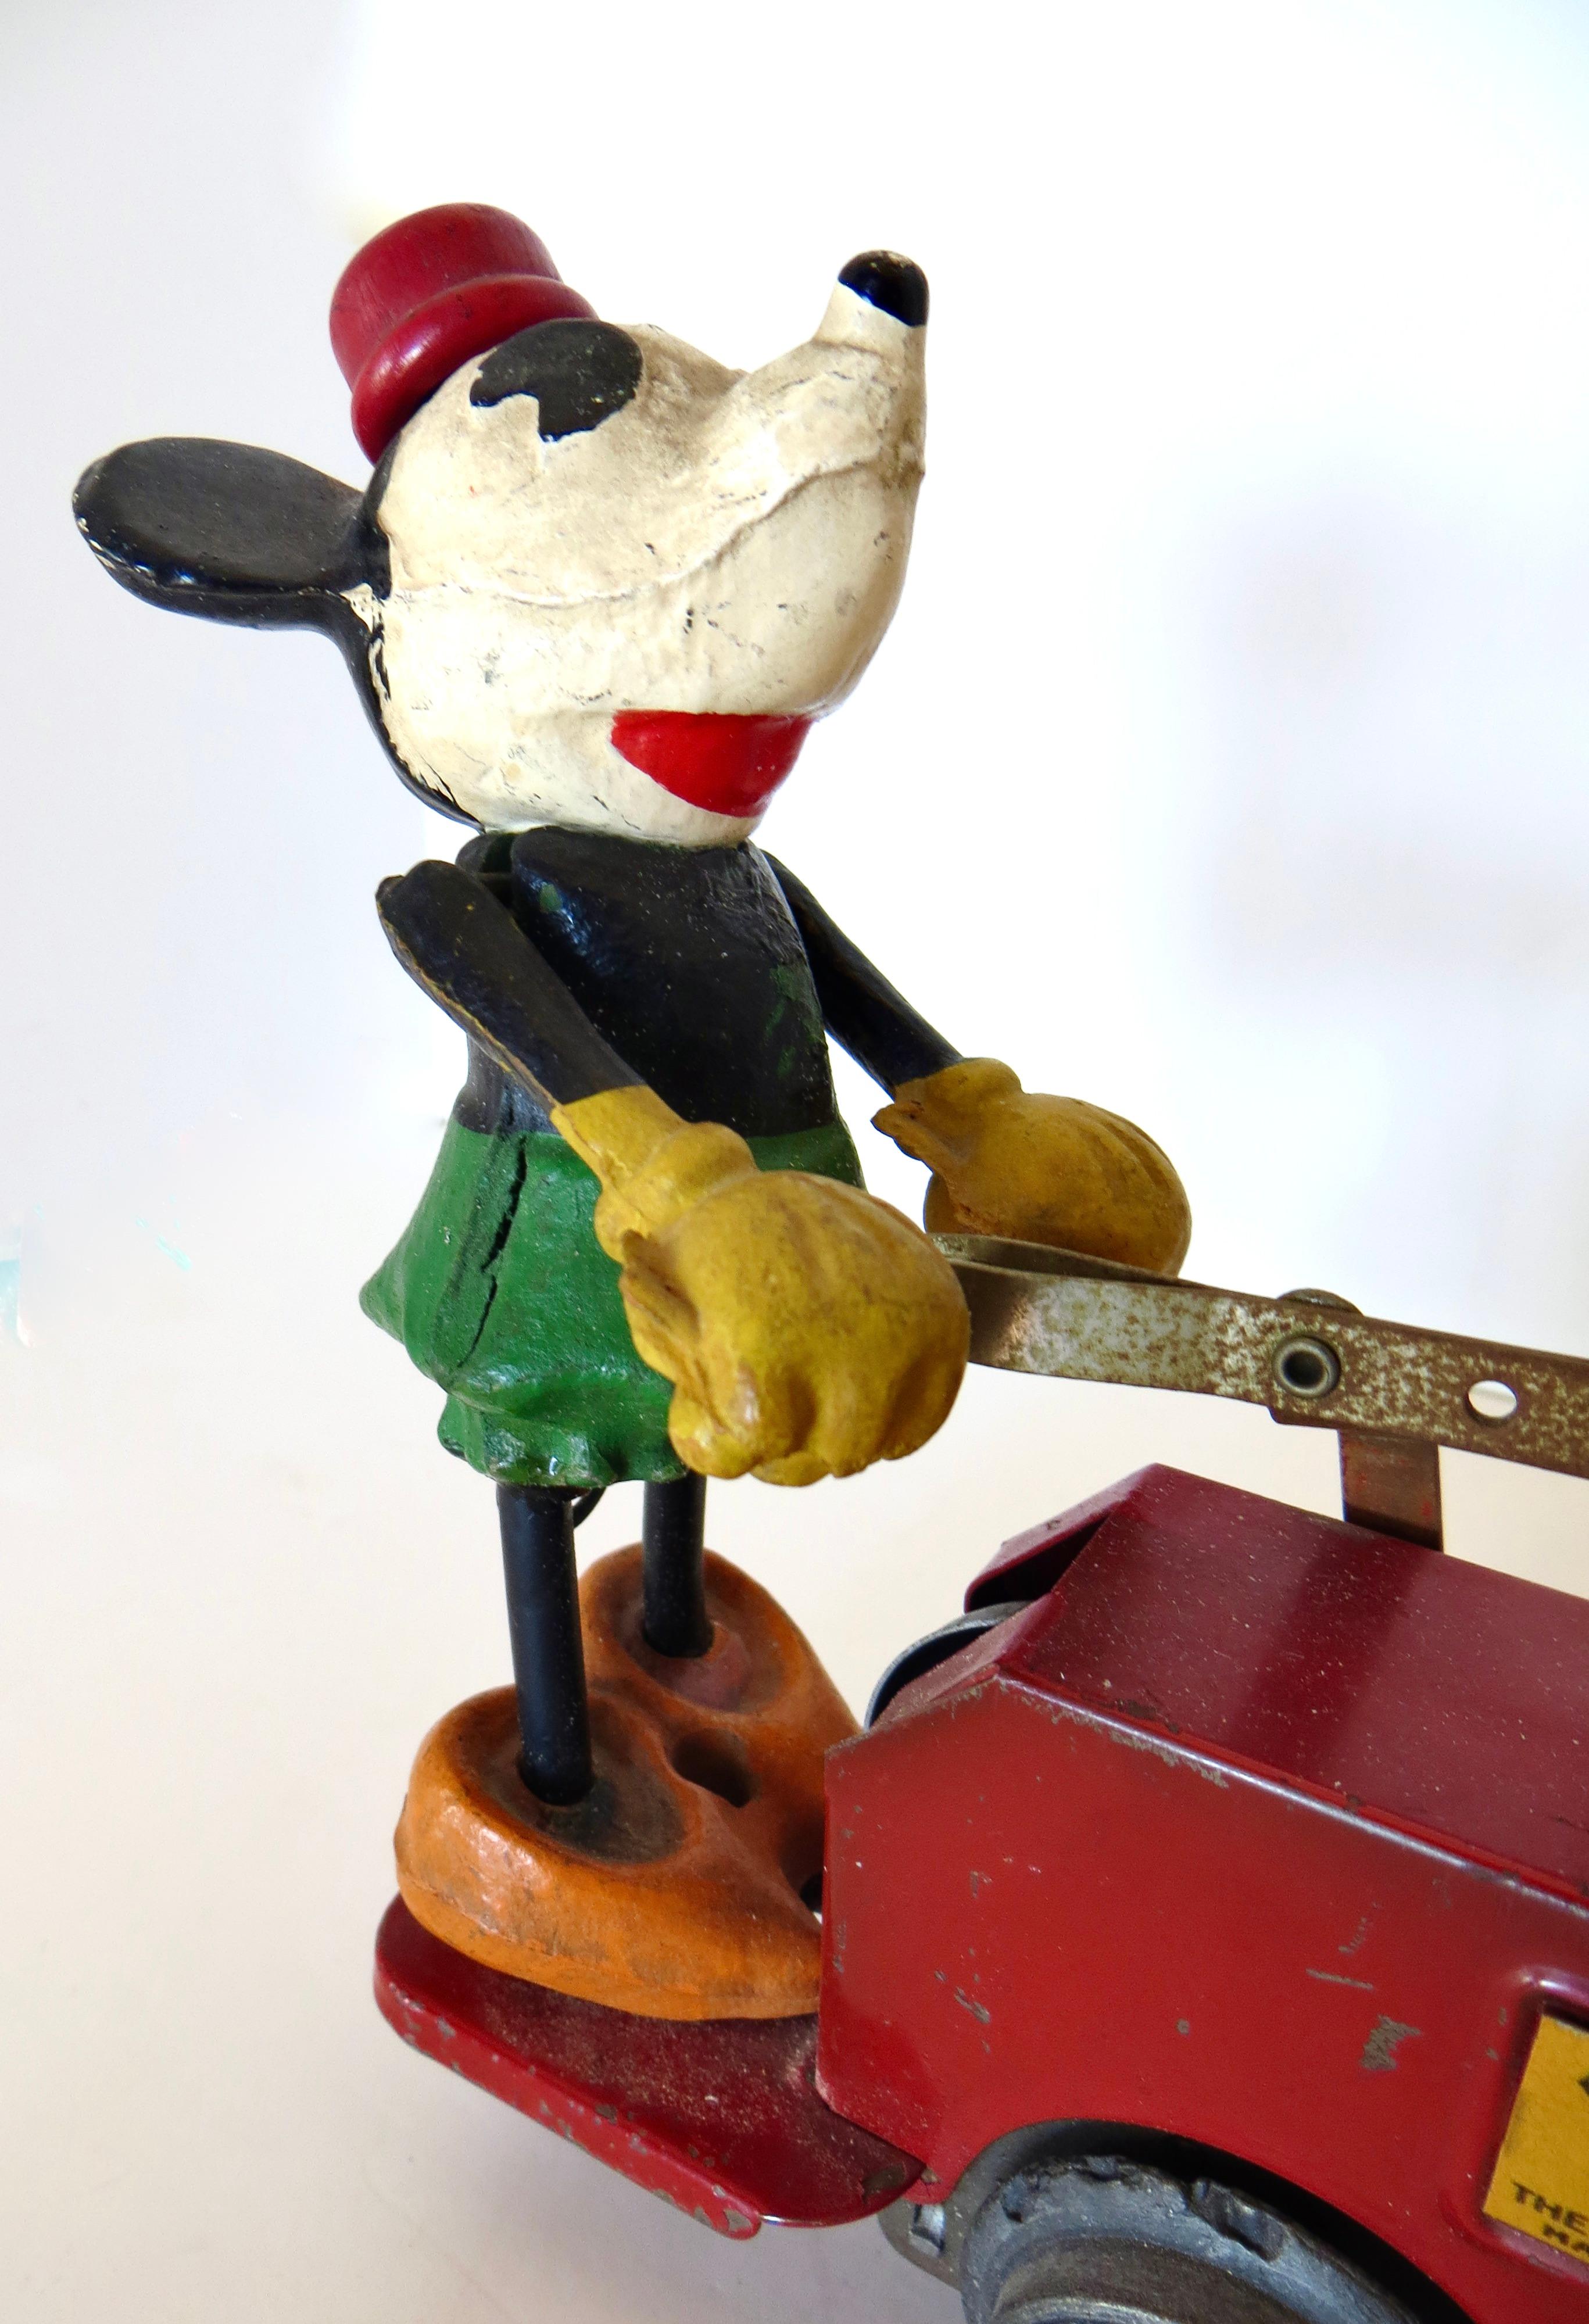 Vintage Mickey/ Minnie Mouse Toy Wind-Up pre-war handcar (train car) circa 1934; by The Lionel Train Company in collaboration with Walt Disney Enterprises. The wind-up toy car features Mickey Mouse and Minnie Mouse pumping alternatively, up and down